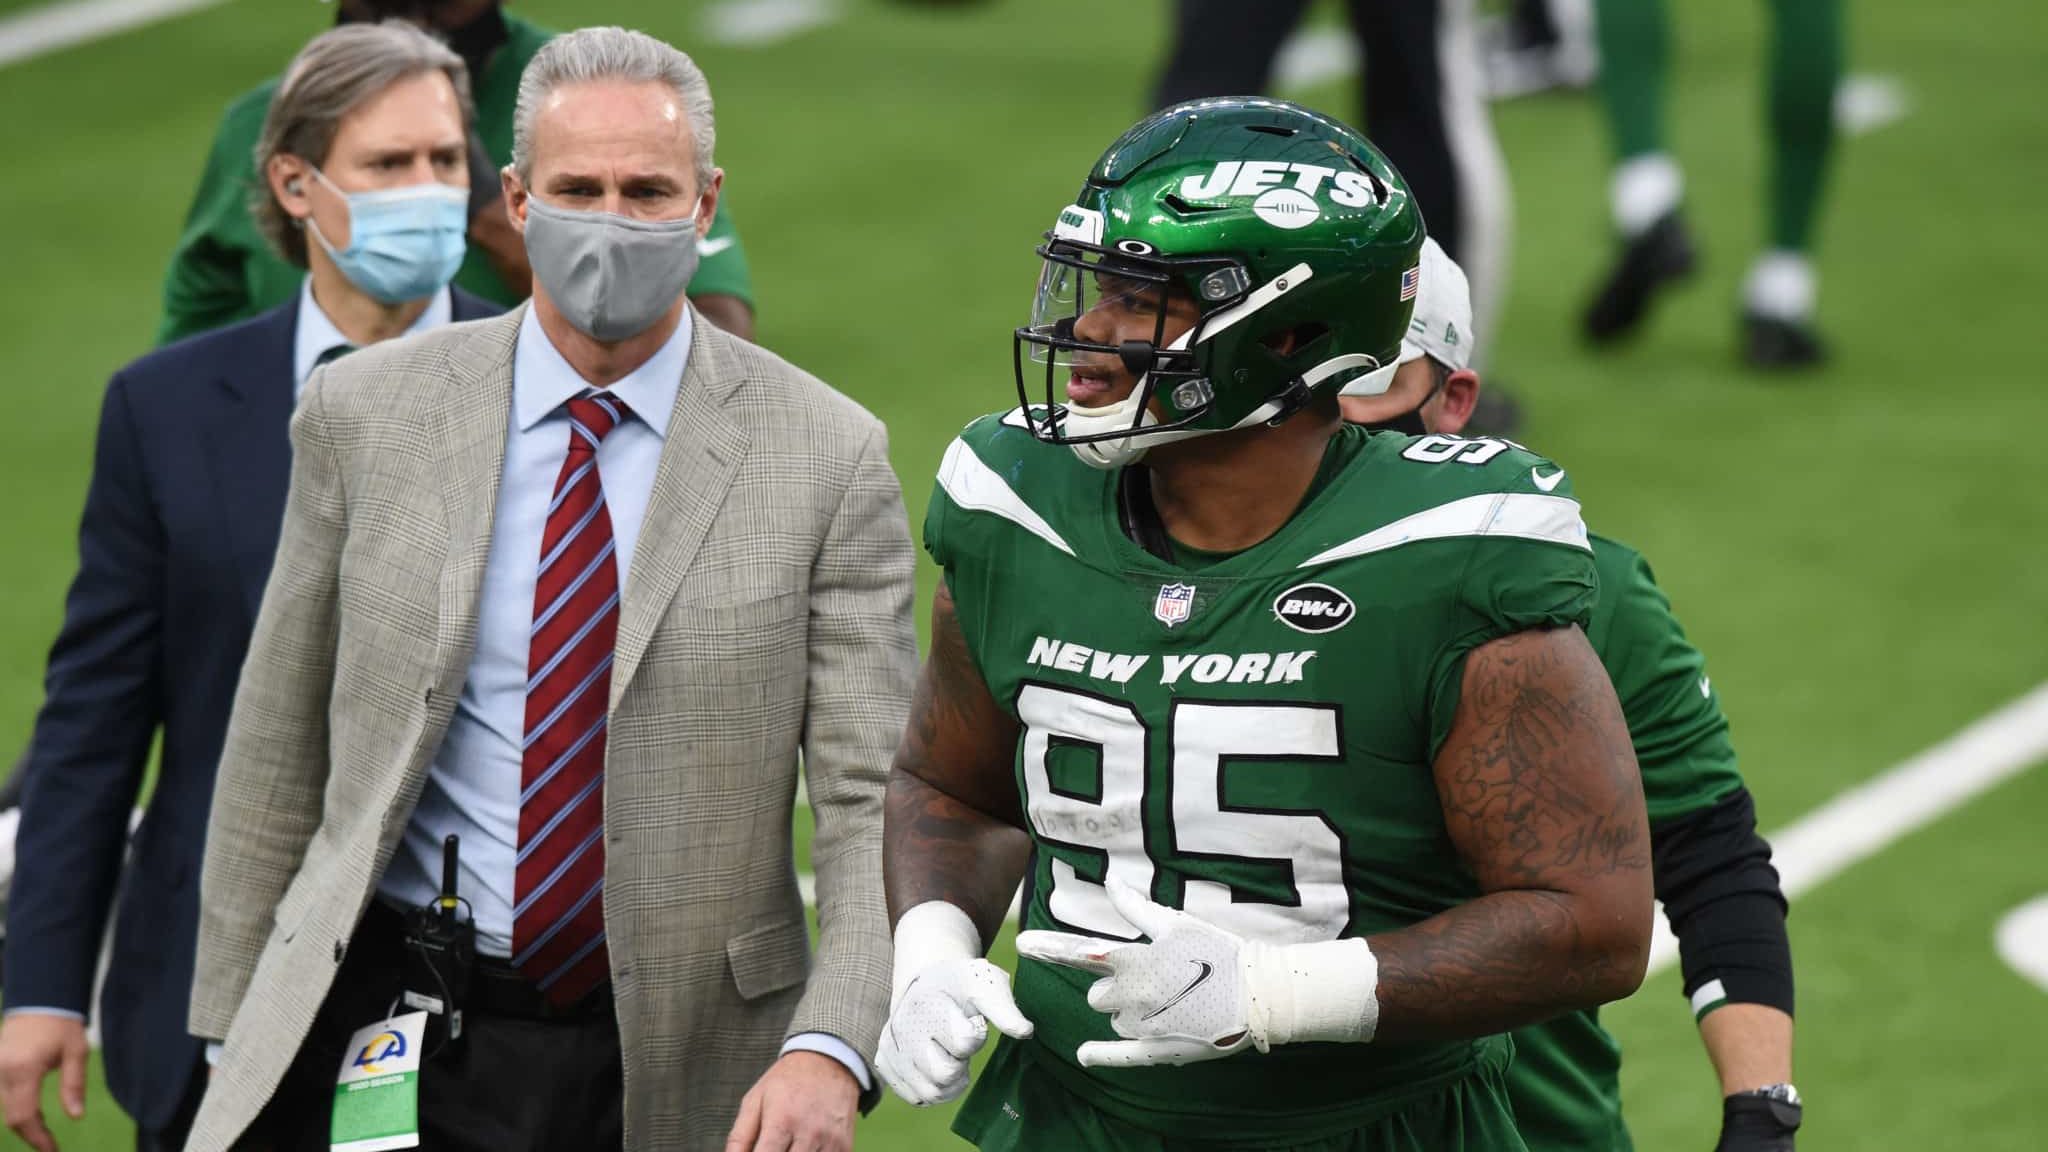 INGLEWOOD, CA - DECEMBER 20: New York Jets Defensive Tackle Quinnen Williams (95) is taken off the field with an injury during an NFL game between the New York Jets and the Los Angeles Rams on December 20, 2020, at SoFi Stadium in Inglewood, CA.